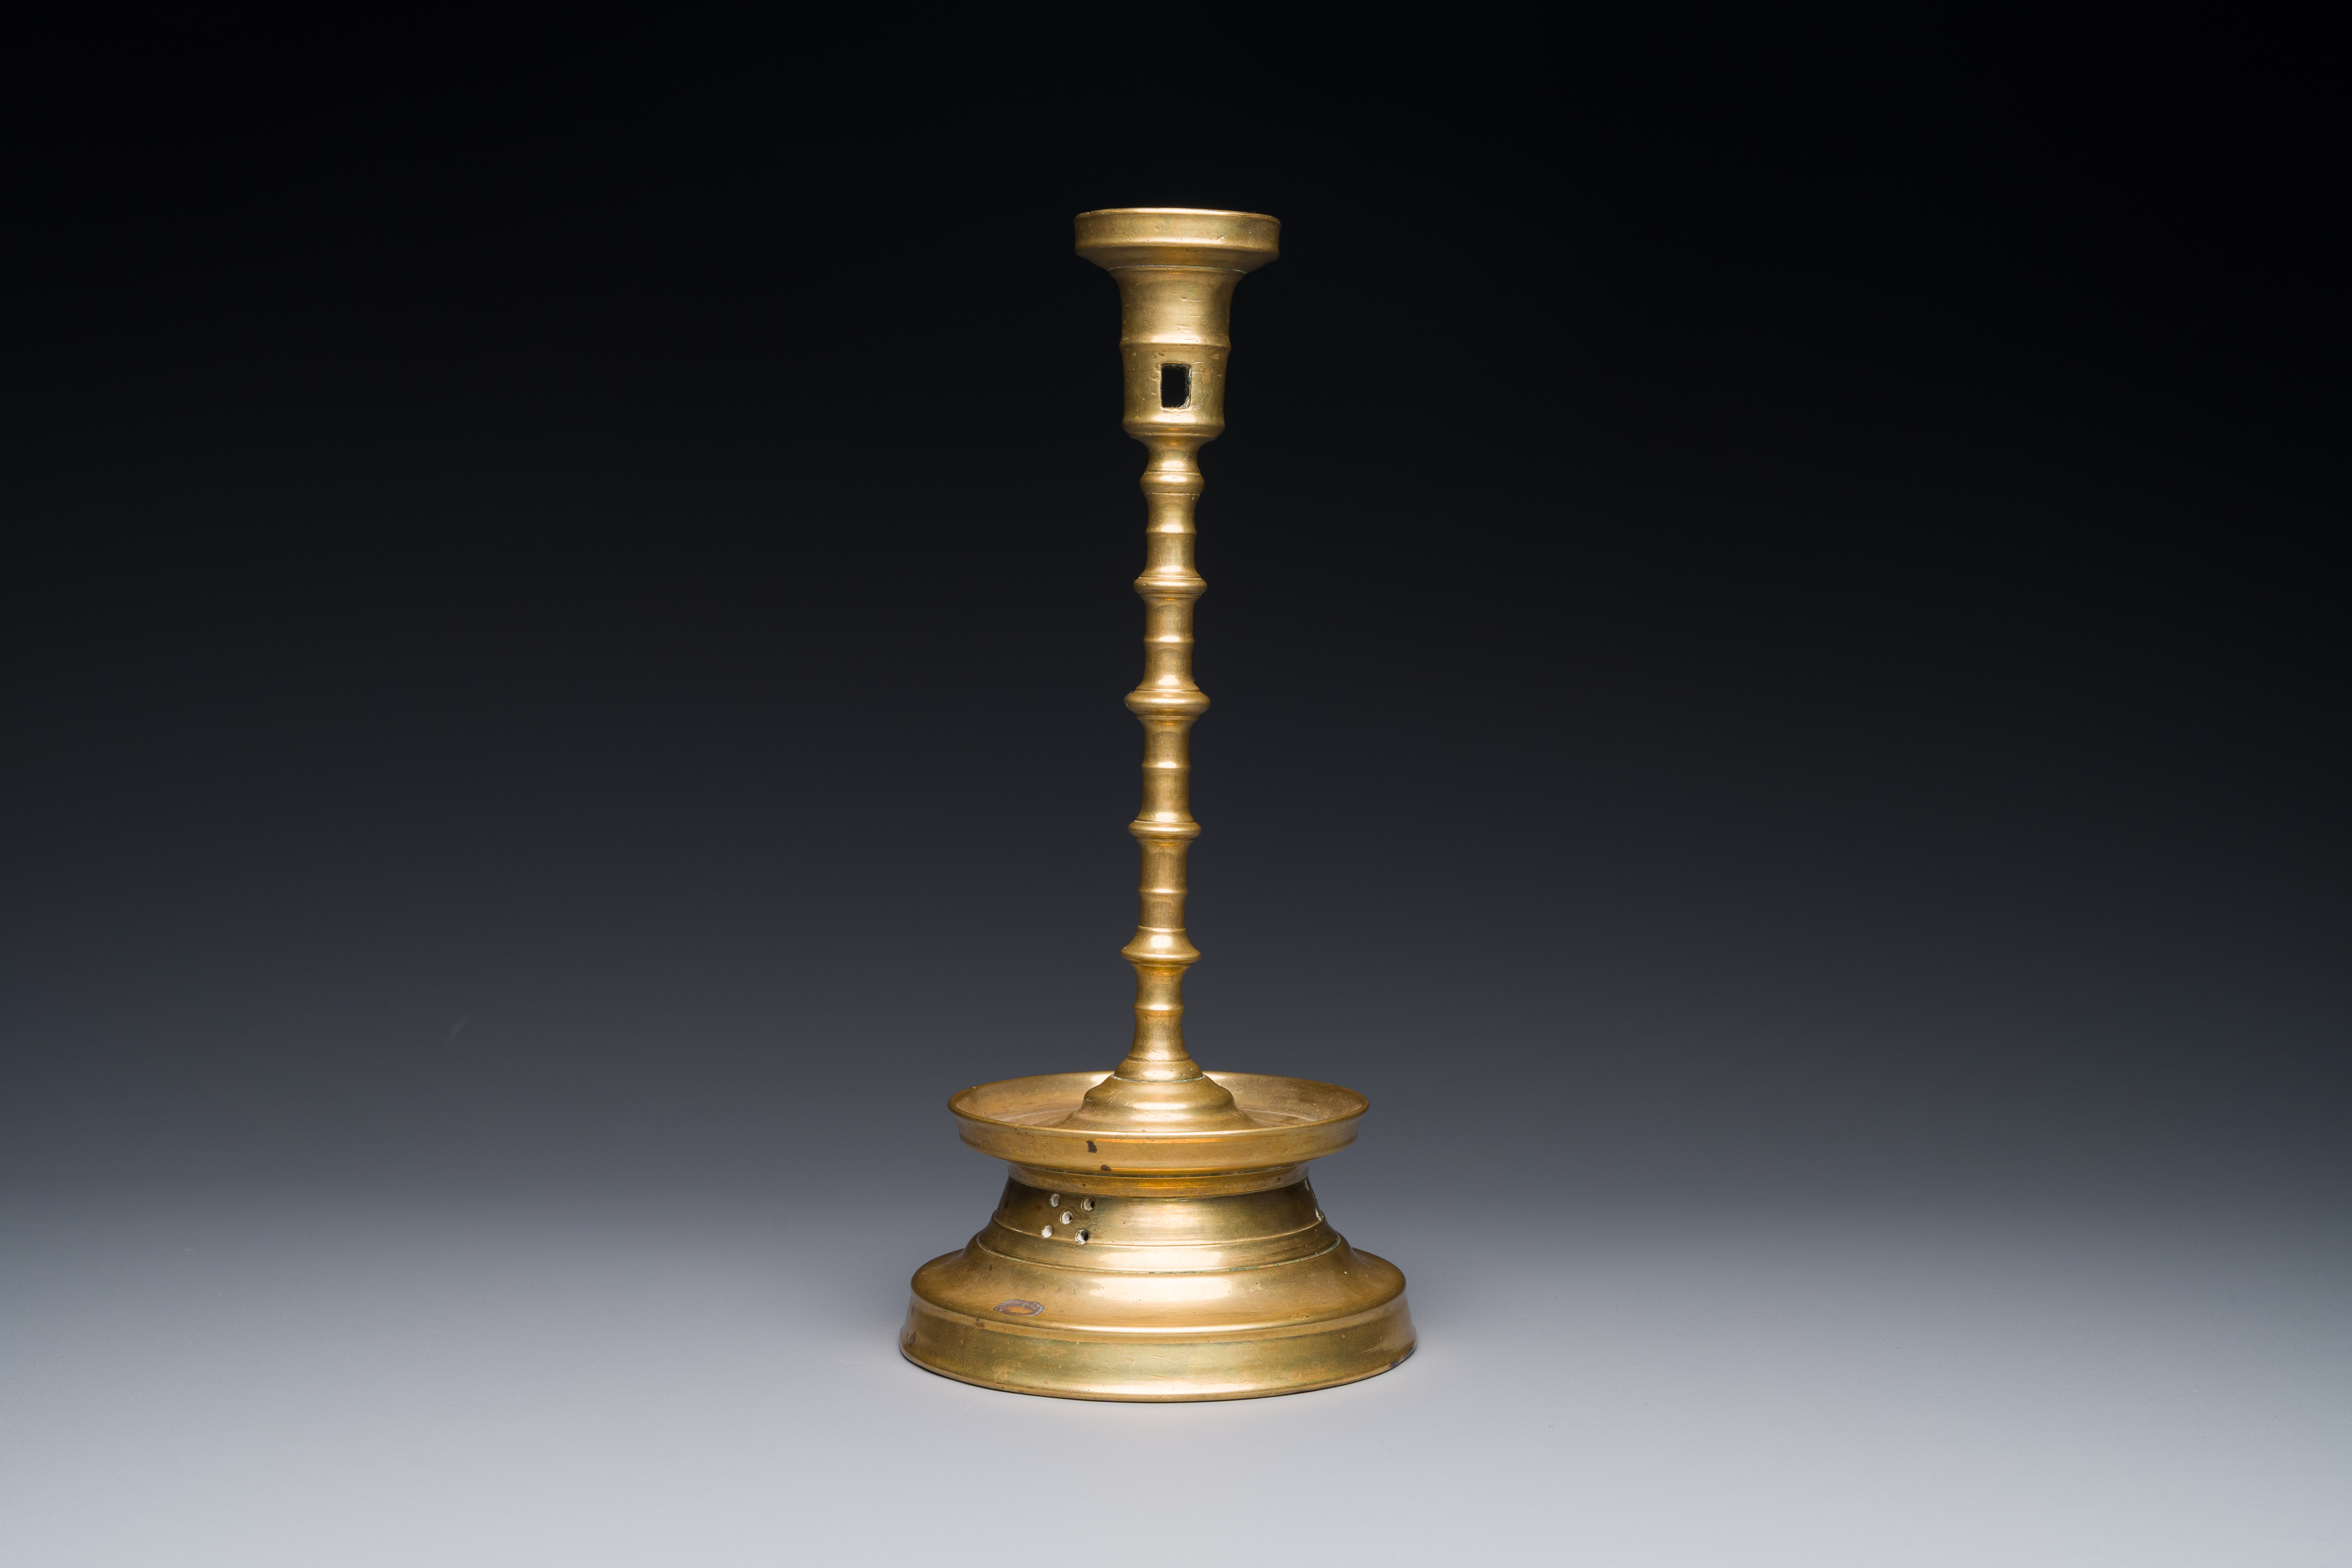 A knotted bronze candlestick, Southern Netherlands, probably 16th C. - Image 5 of 15